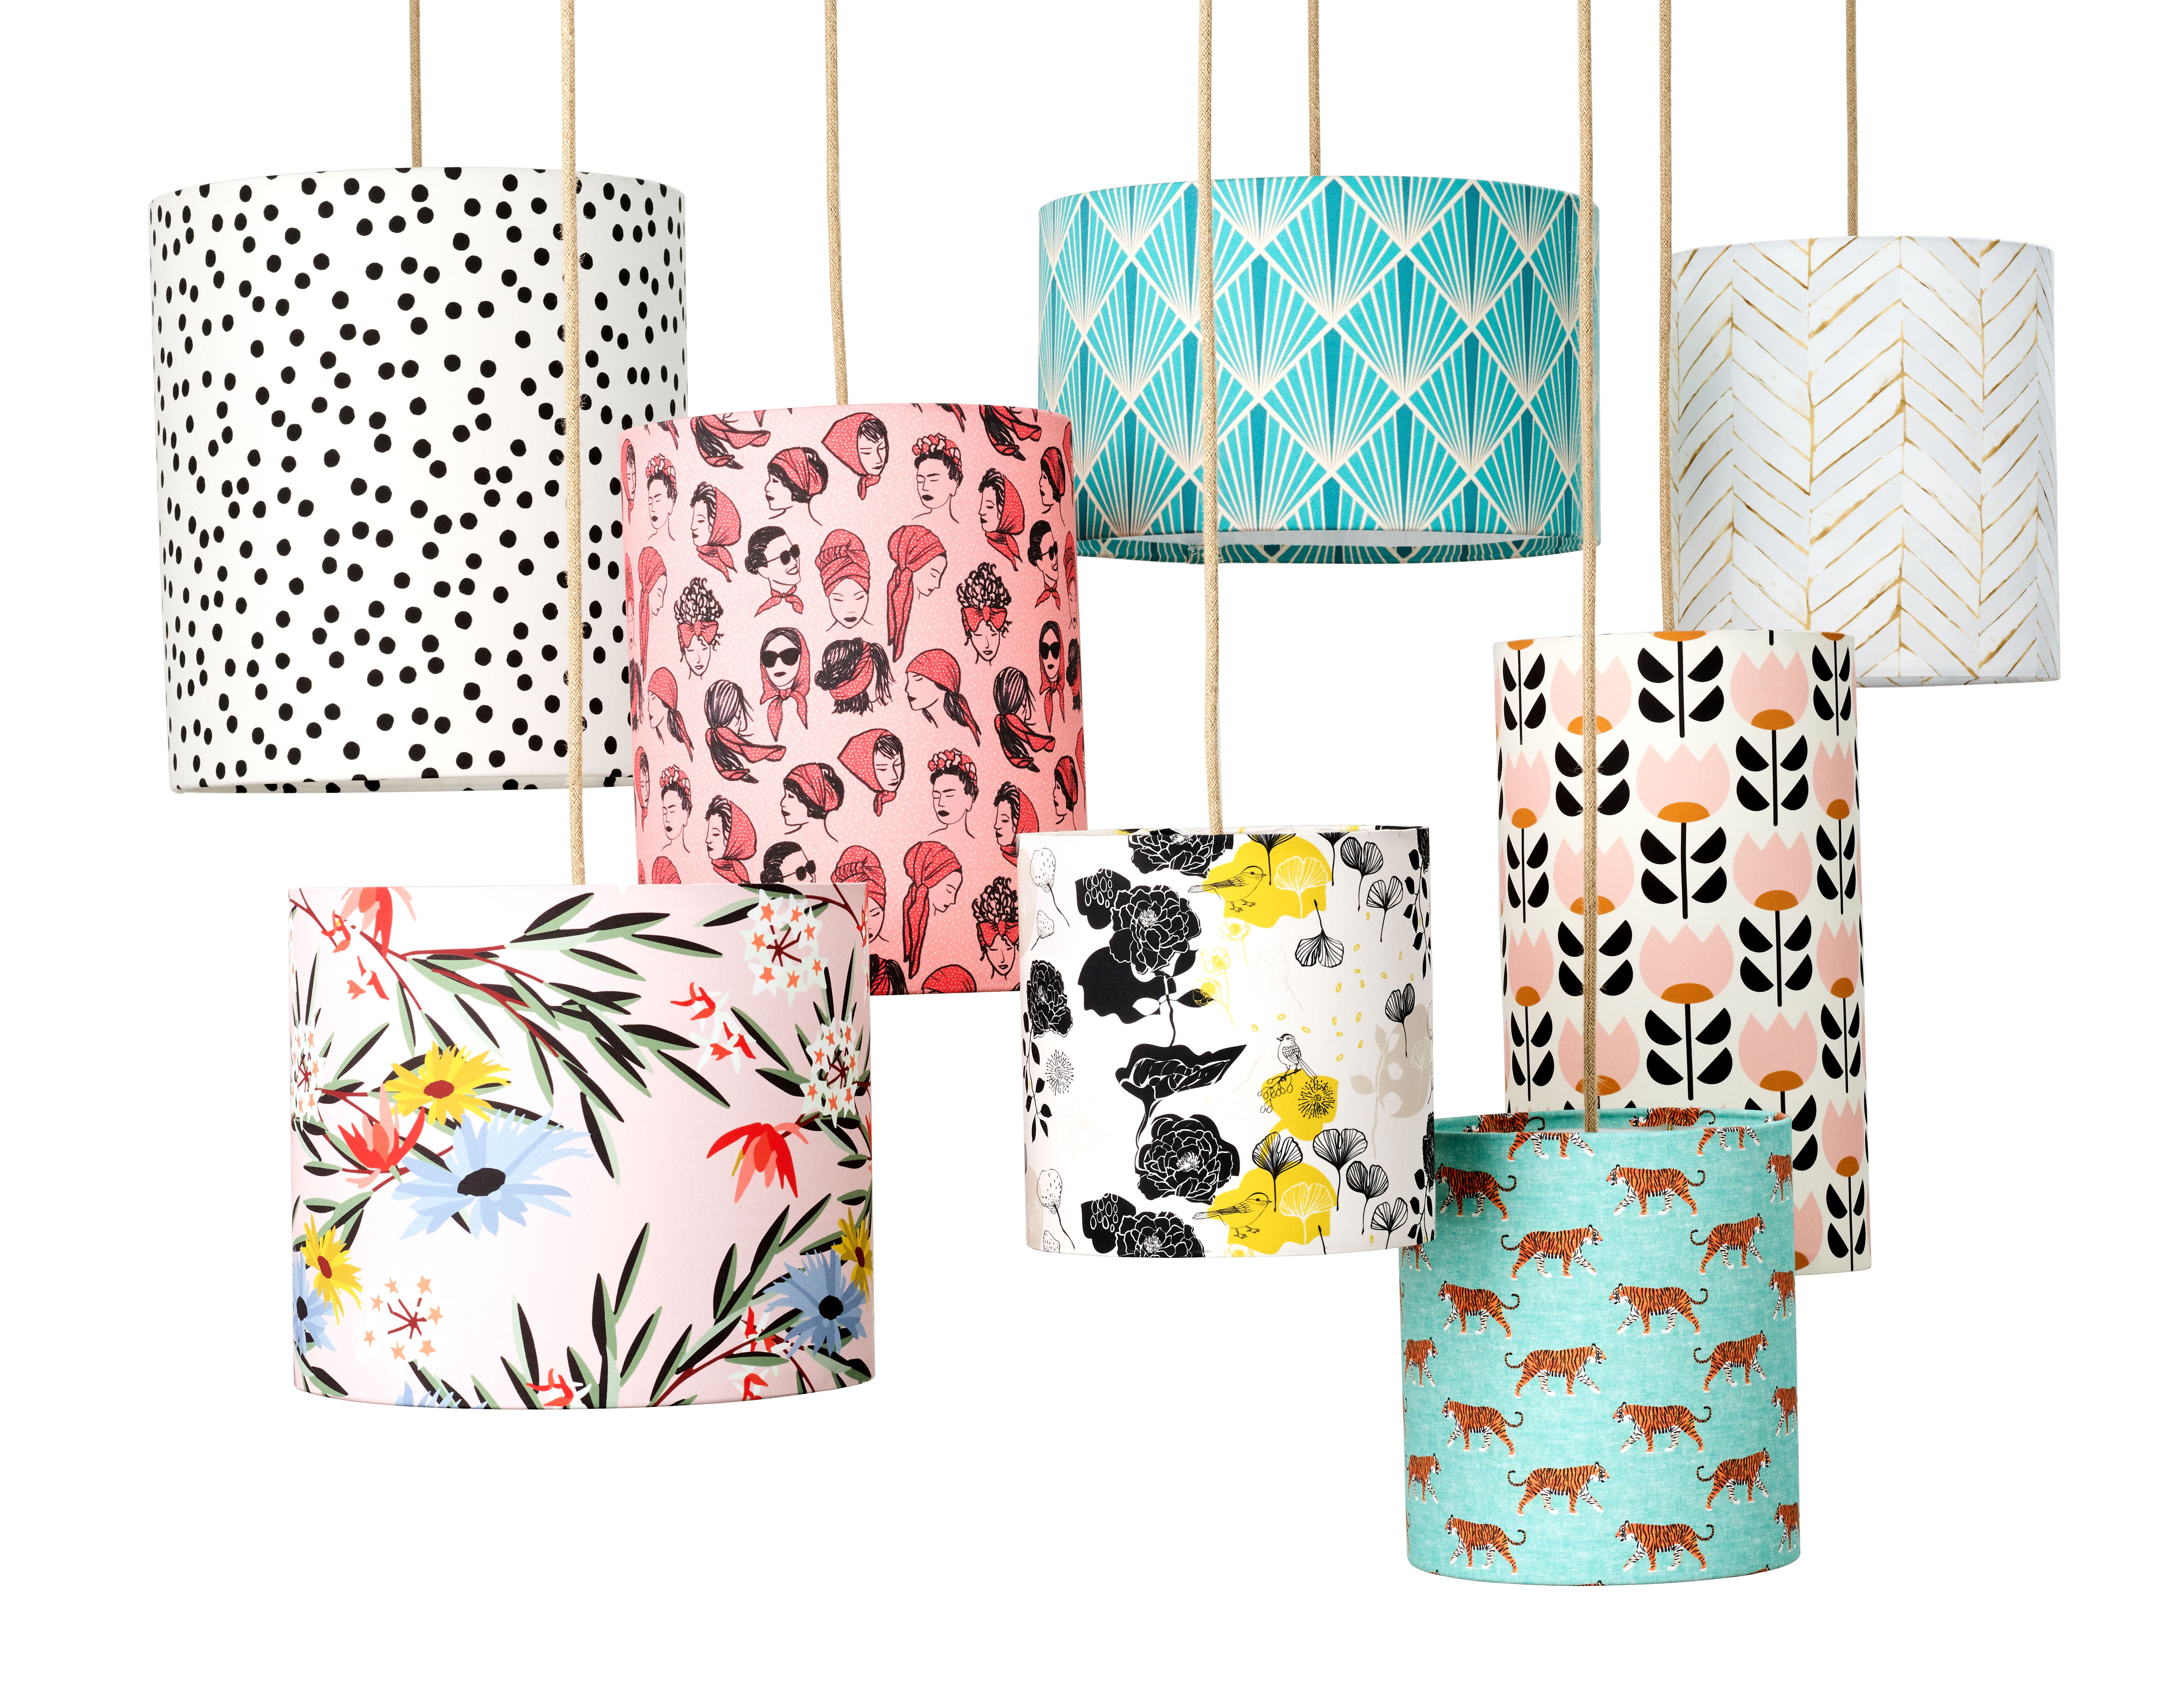 How To Make A Lampshade Using Kit, Make Your Own Lampshade Kit